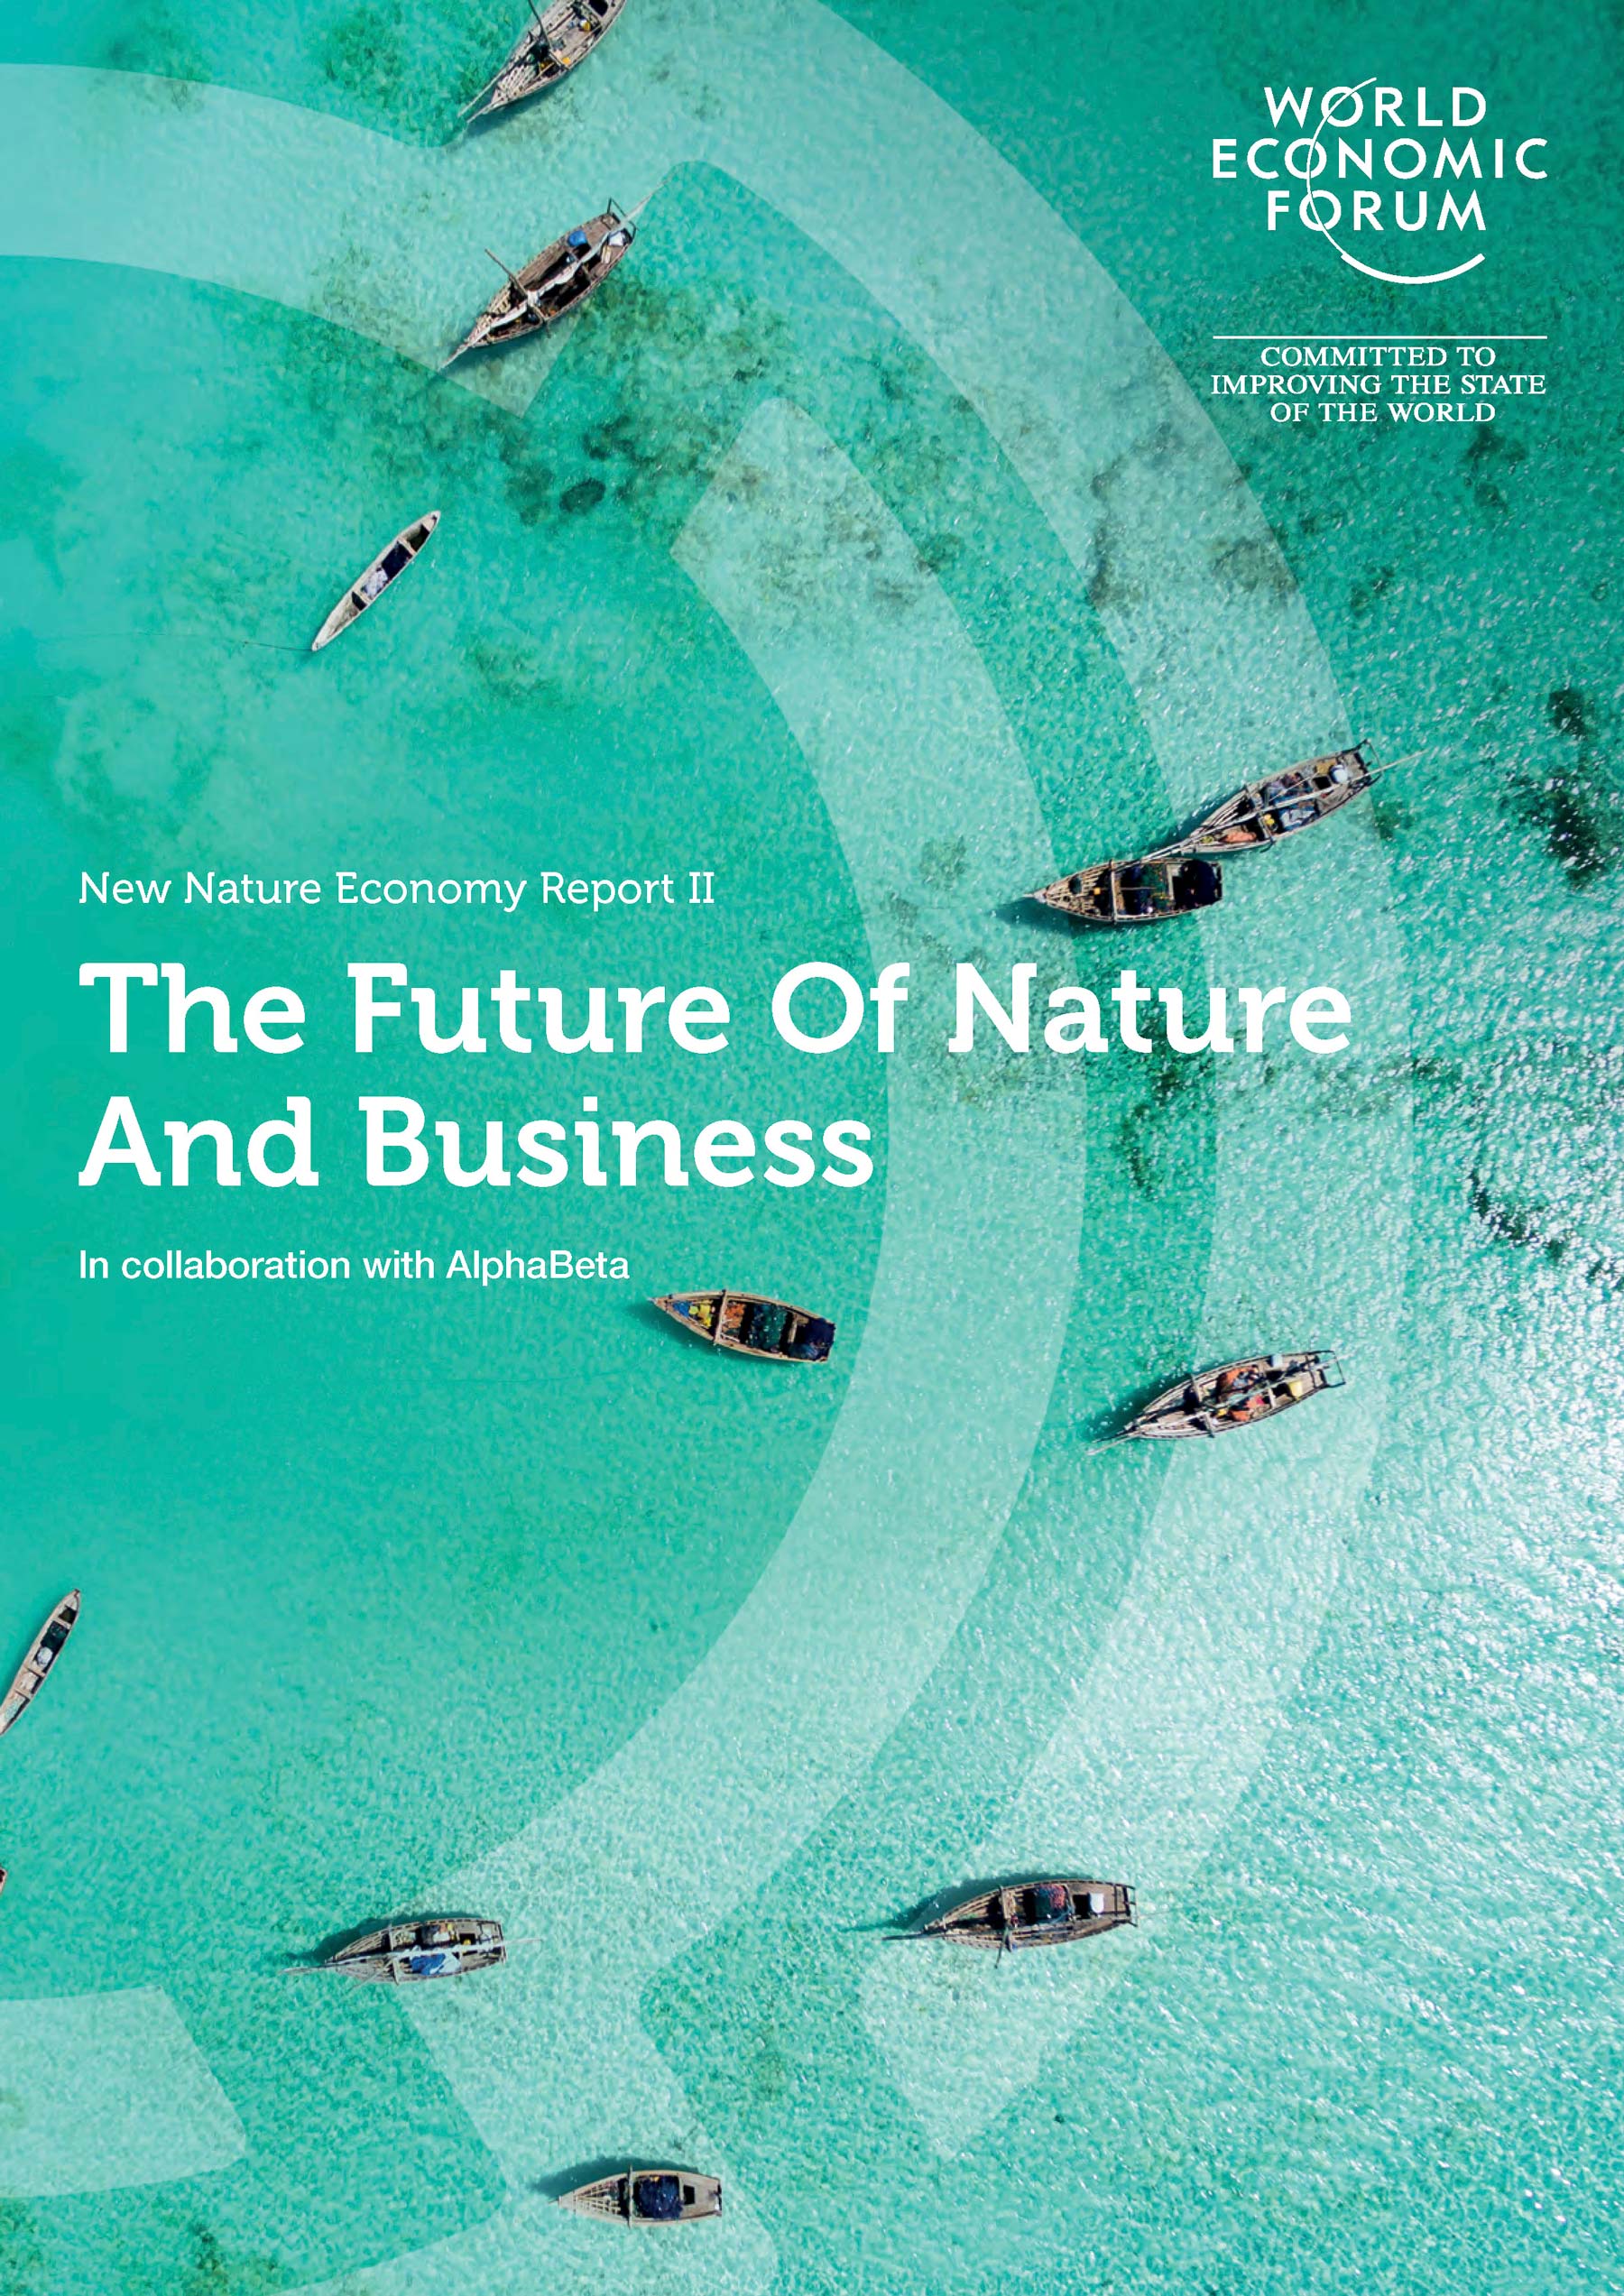 WEF_The_Future_of_Nature_and_Business